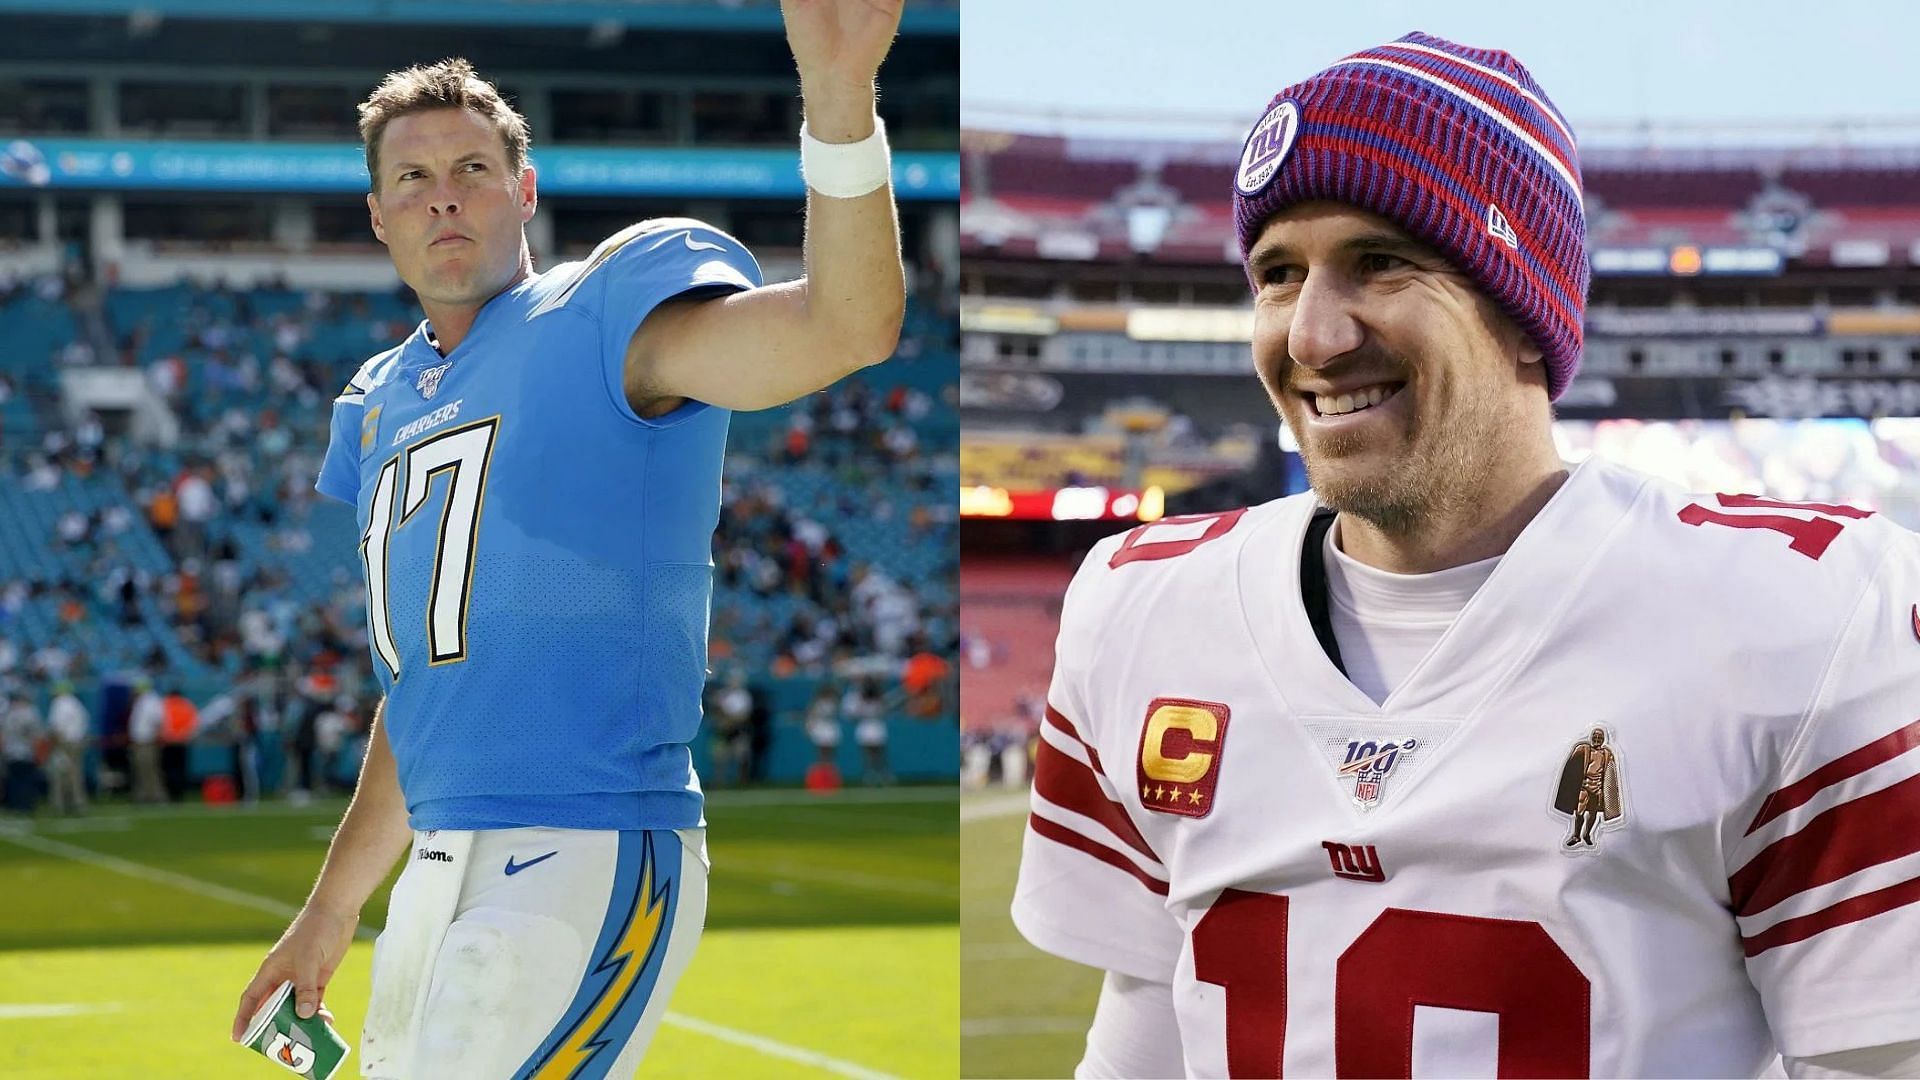 Philip Rivers and Eli Manning were supposed to be on different teams